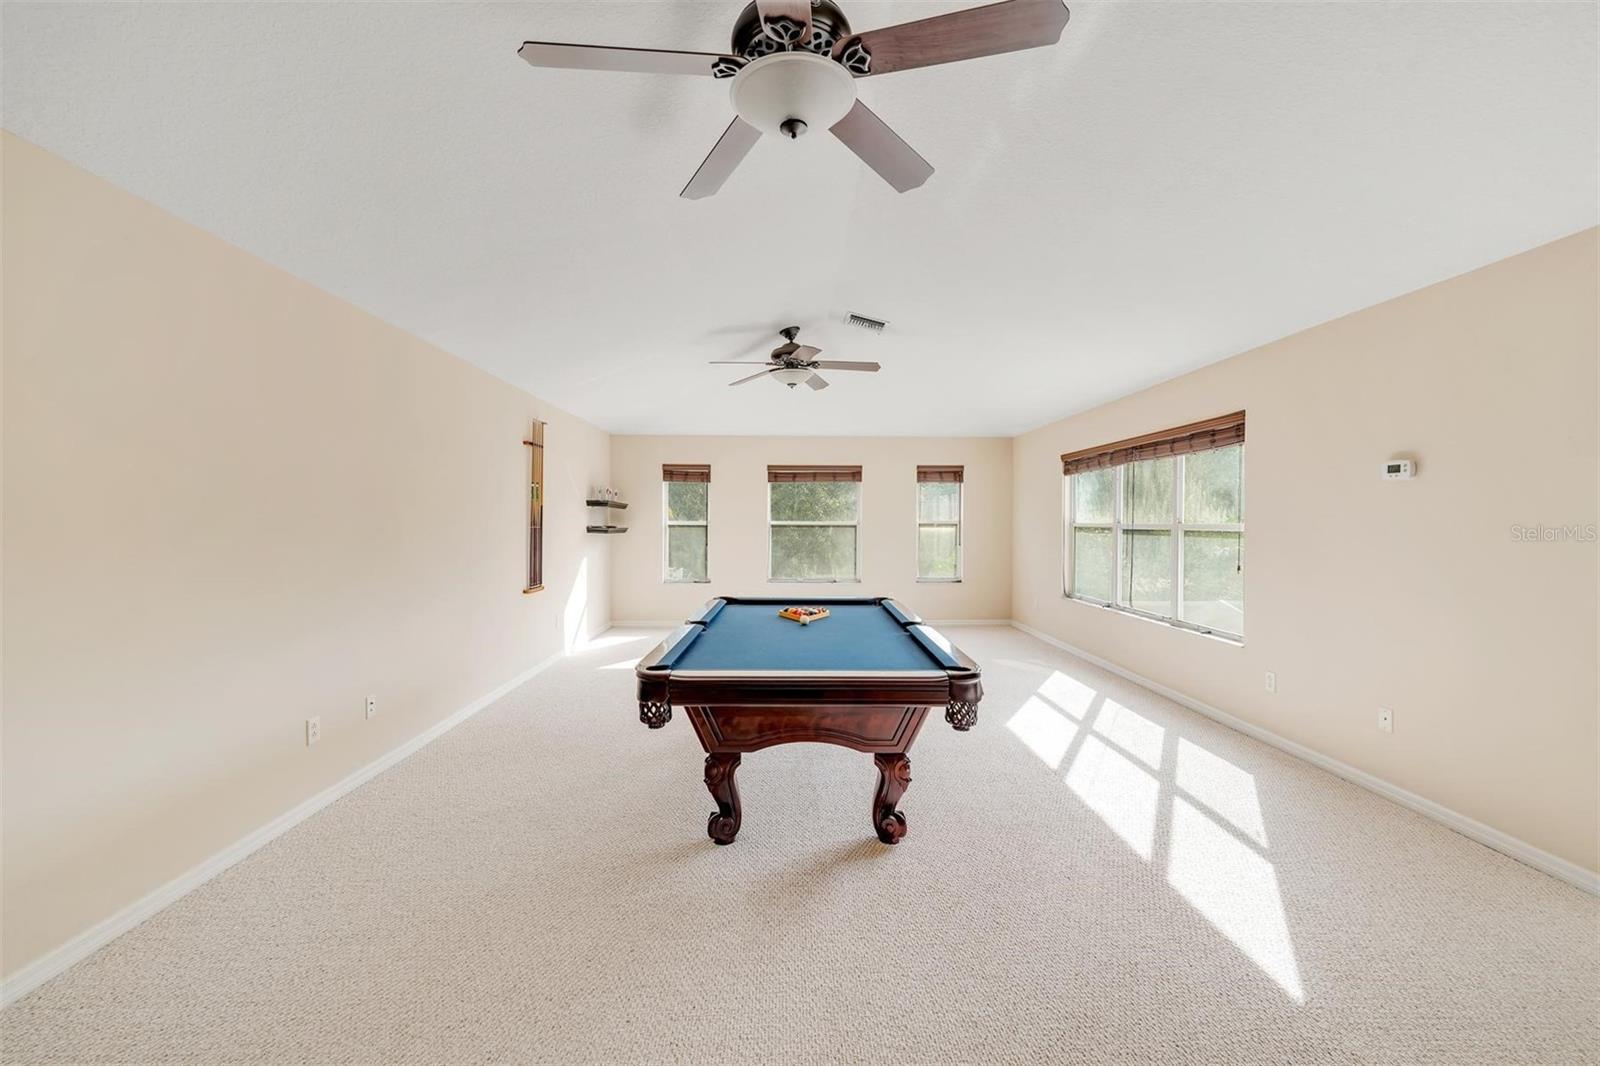 POOL TABLE, Cues, and Shelves Convey